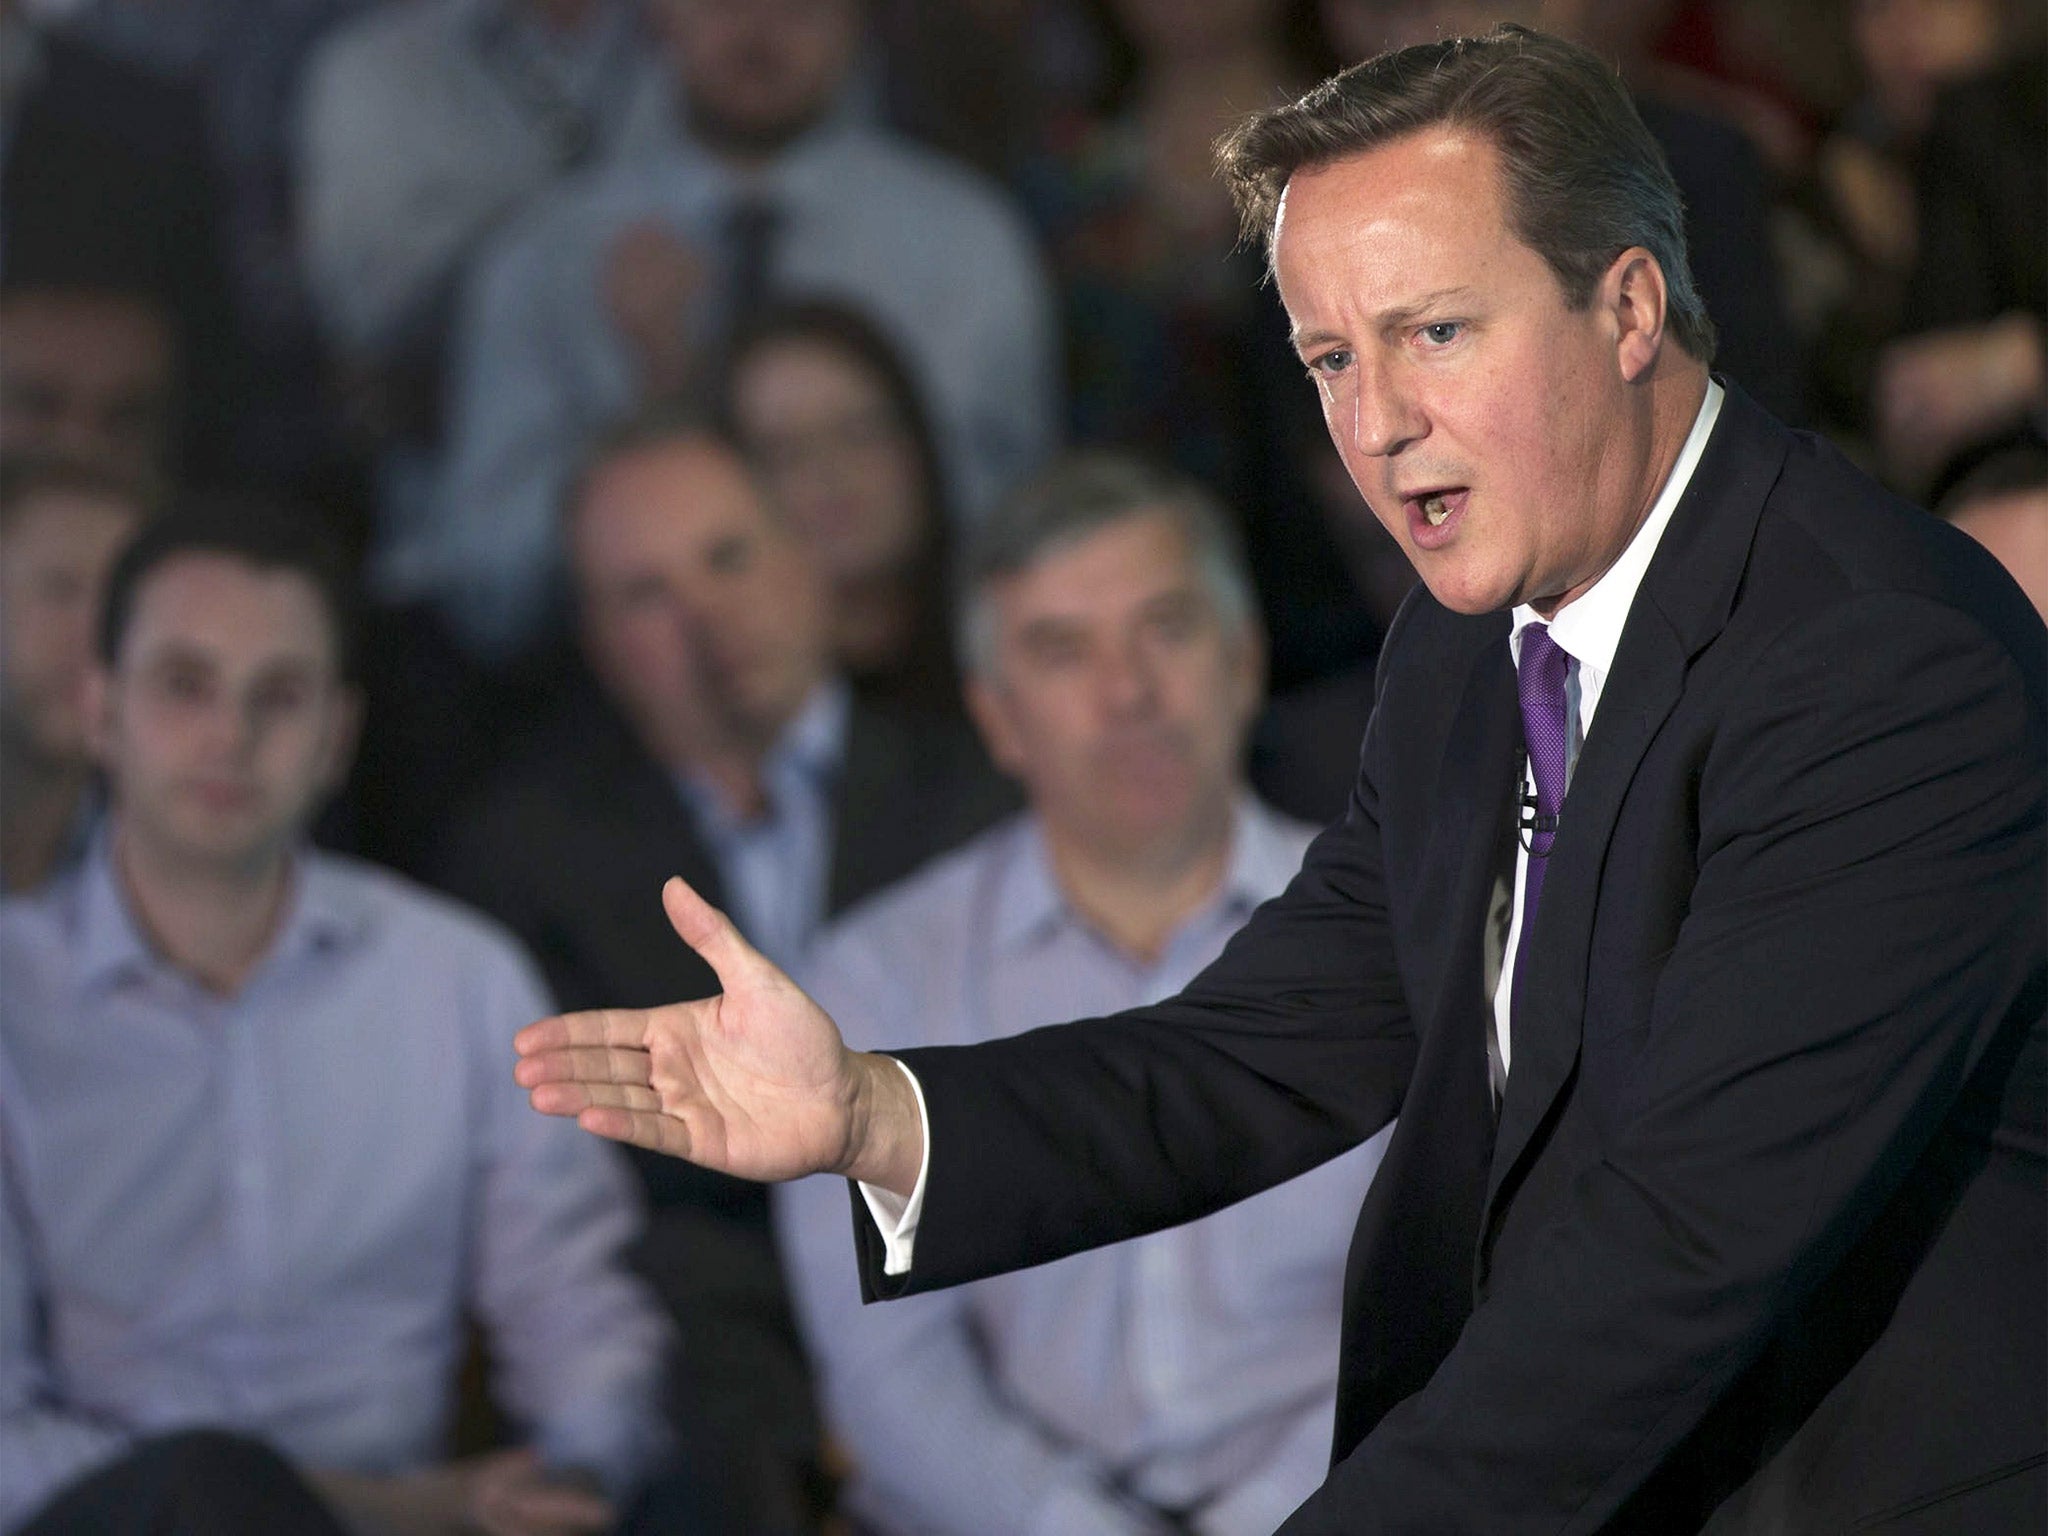 British Prime Minister David Cameron gestures as he speaks during a visit to Scottish Widows offices in Edinburgh